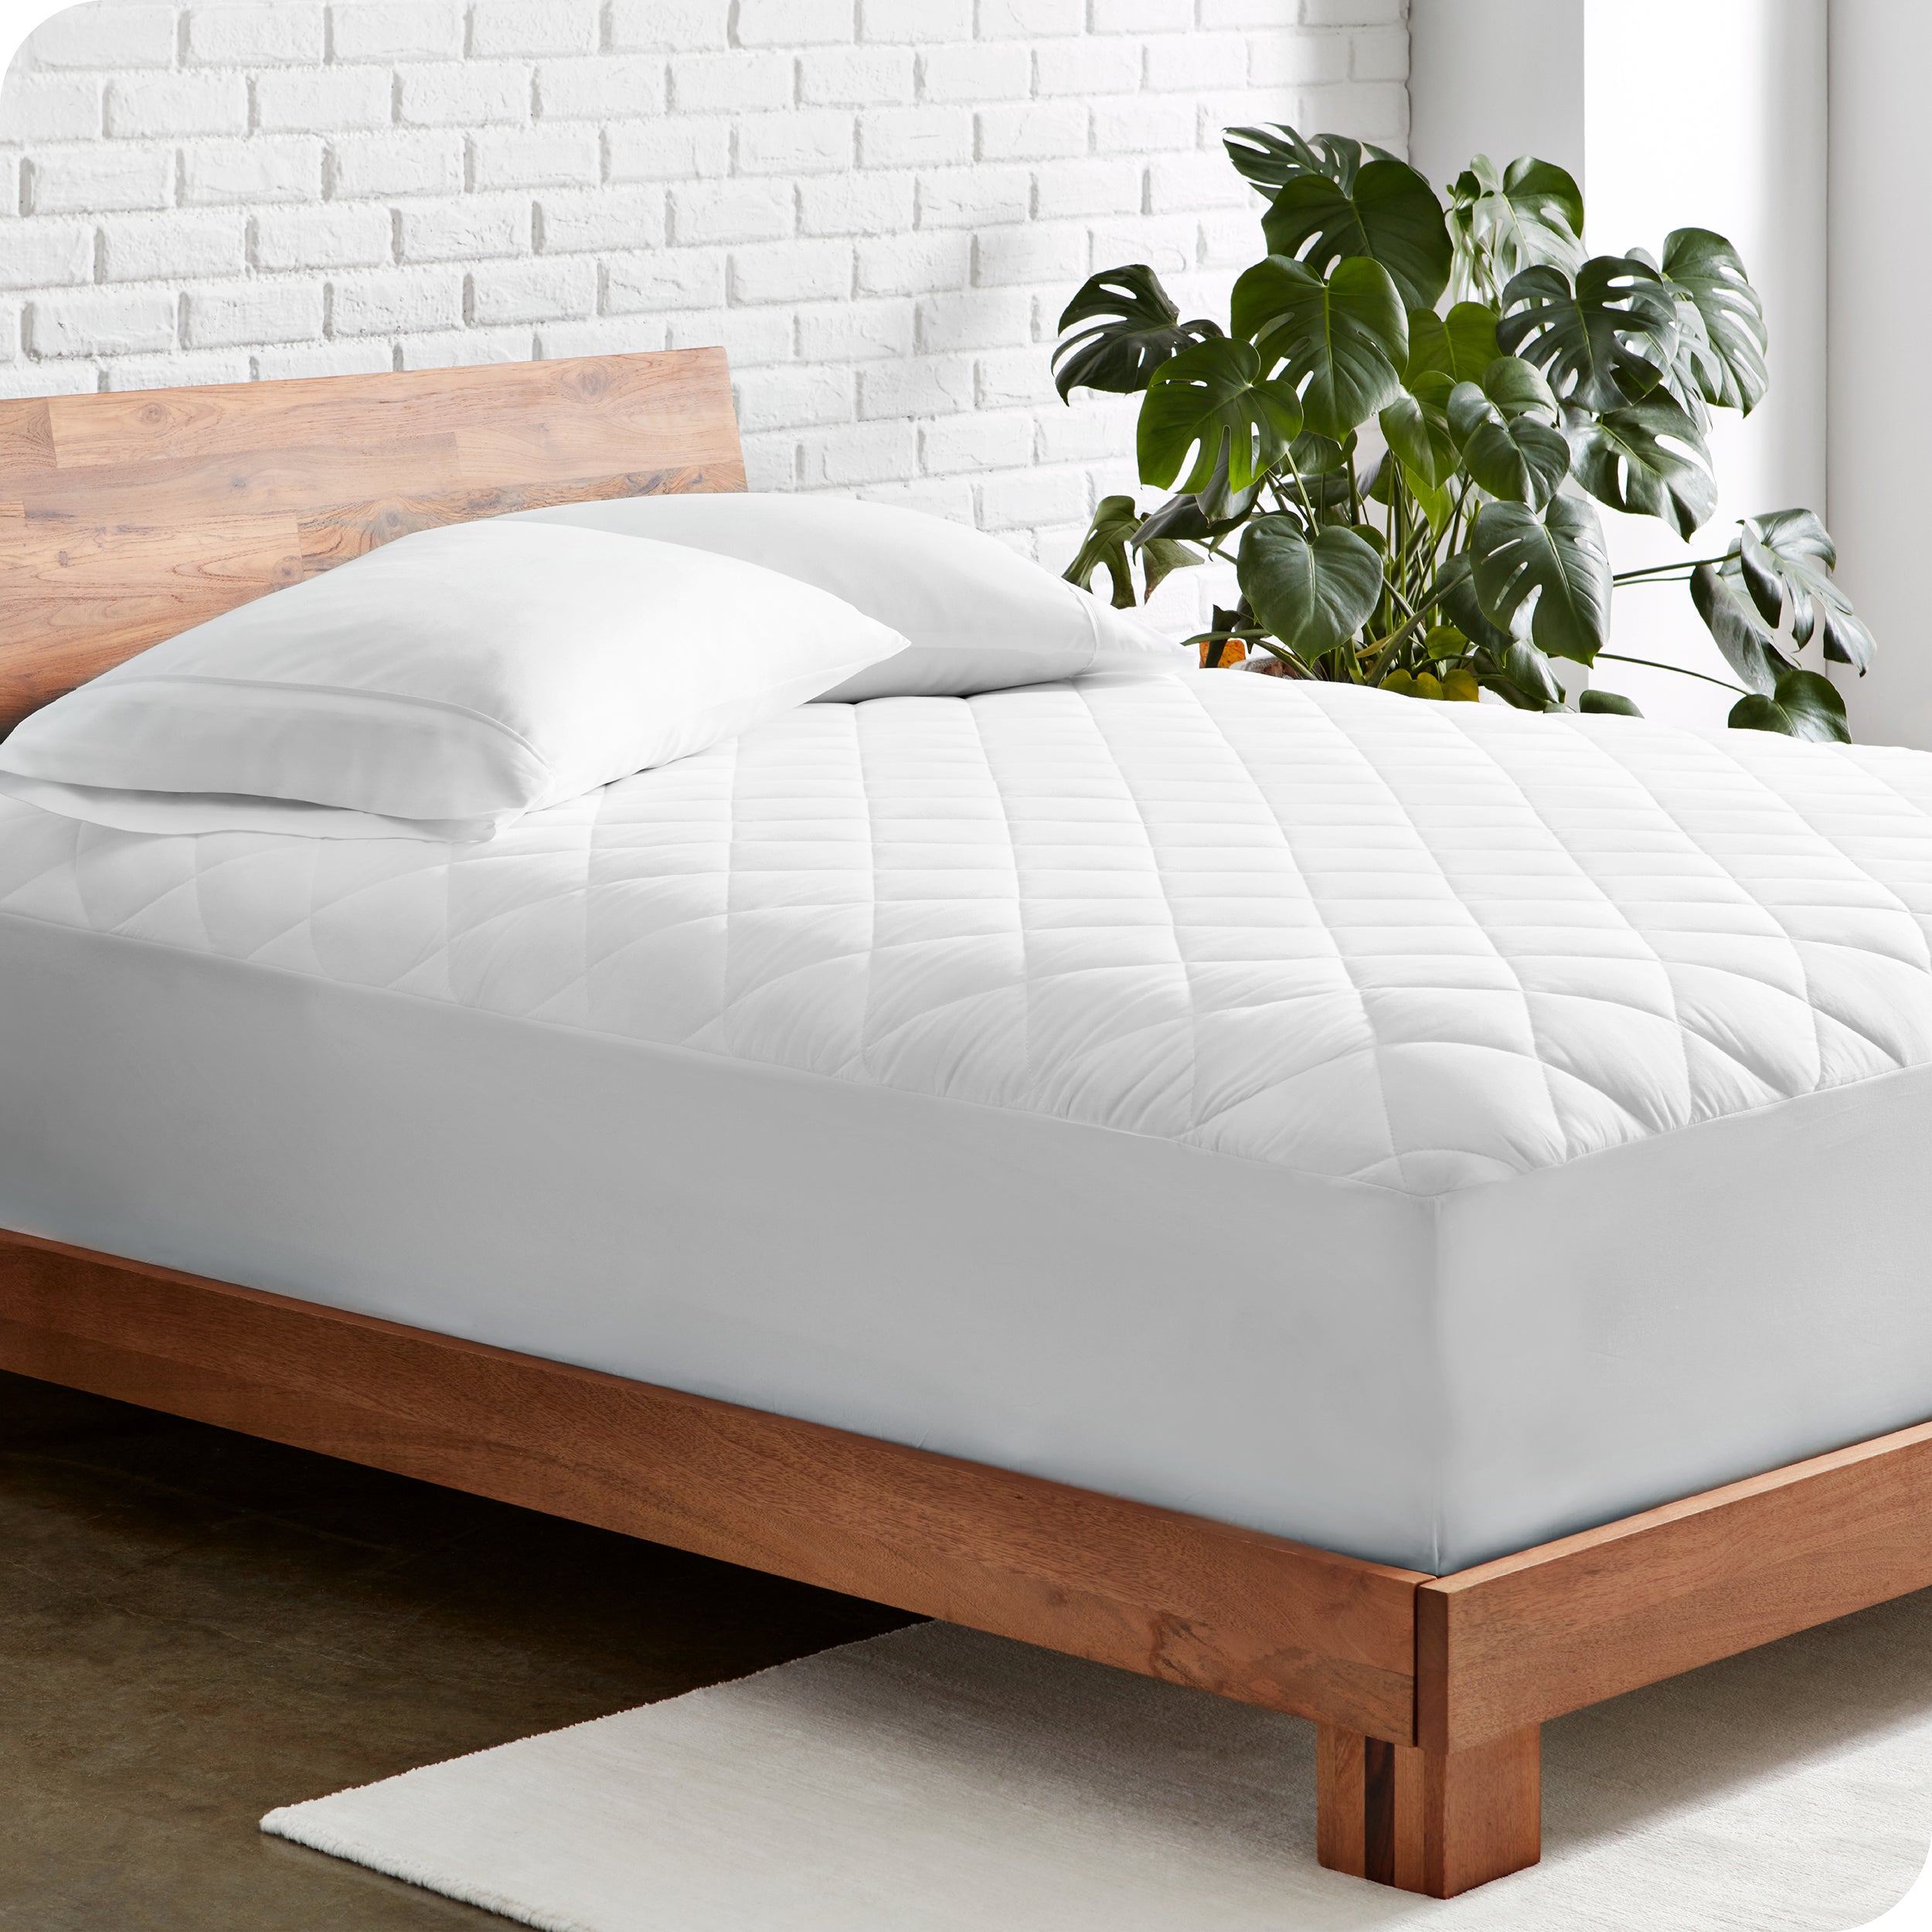 A diagonal view of a bed frame with mattress on it. There is a mattress pad on the mattress and 2 pillows on top of the mattress pad. A large plant is next to the bed. 